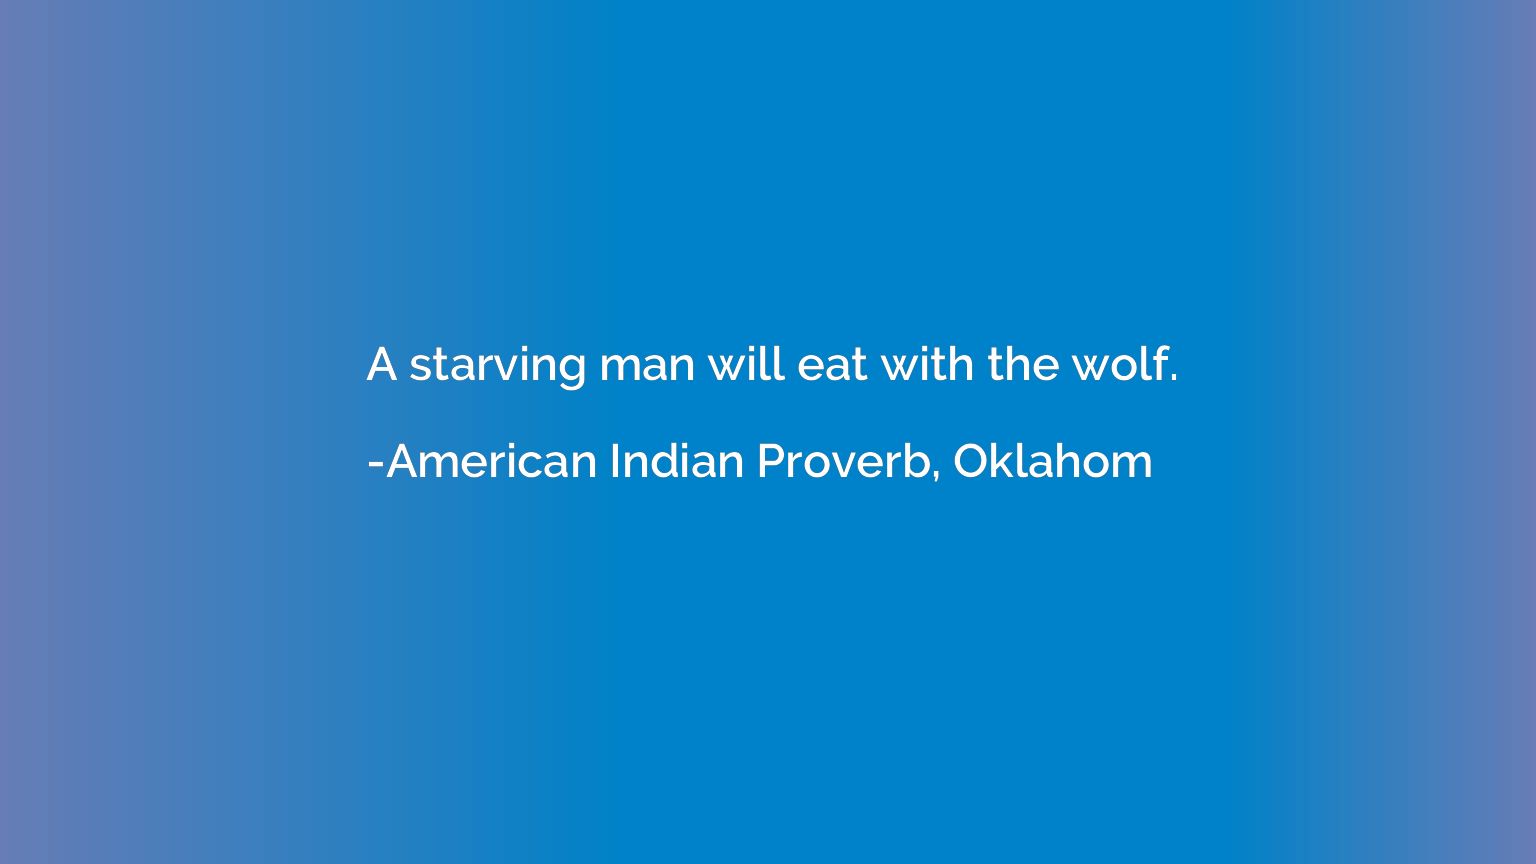 A starving man will eat with the wolf.